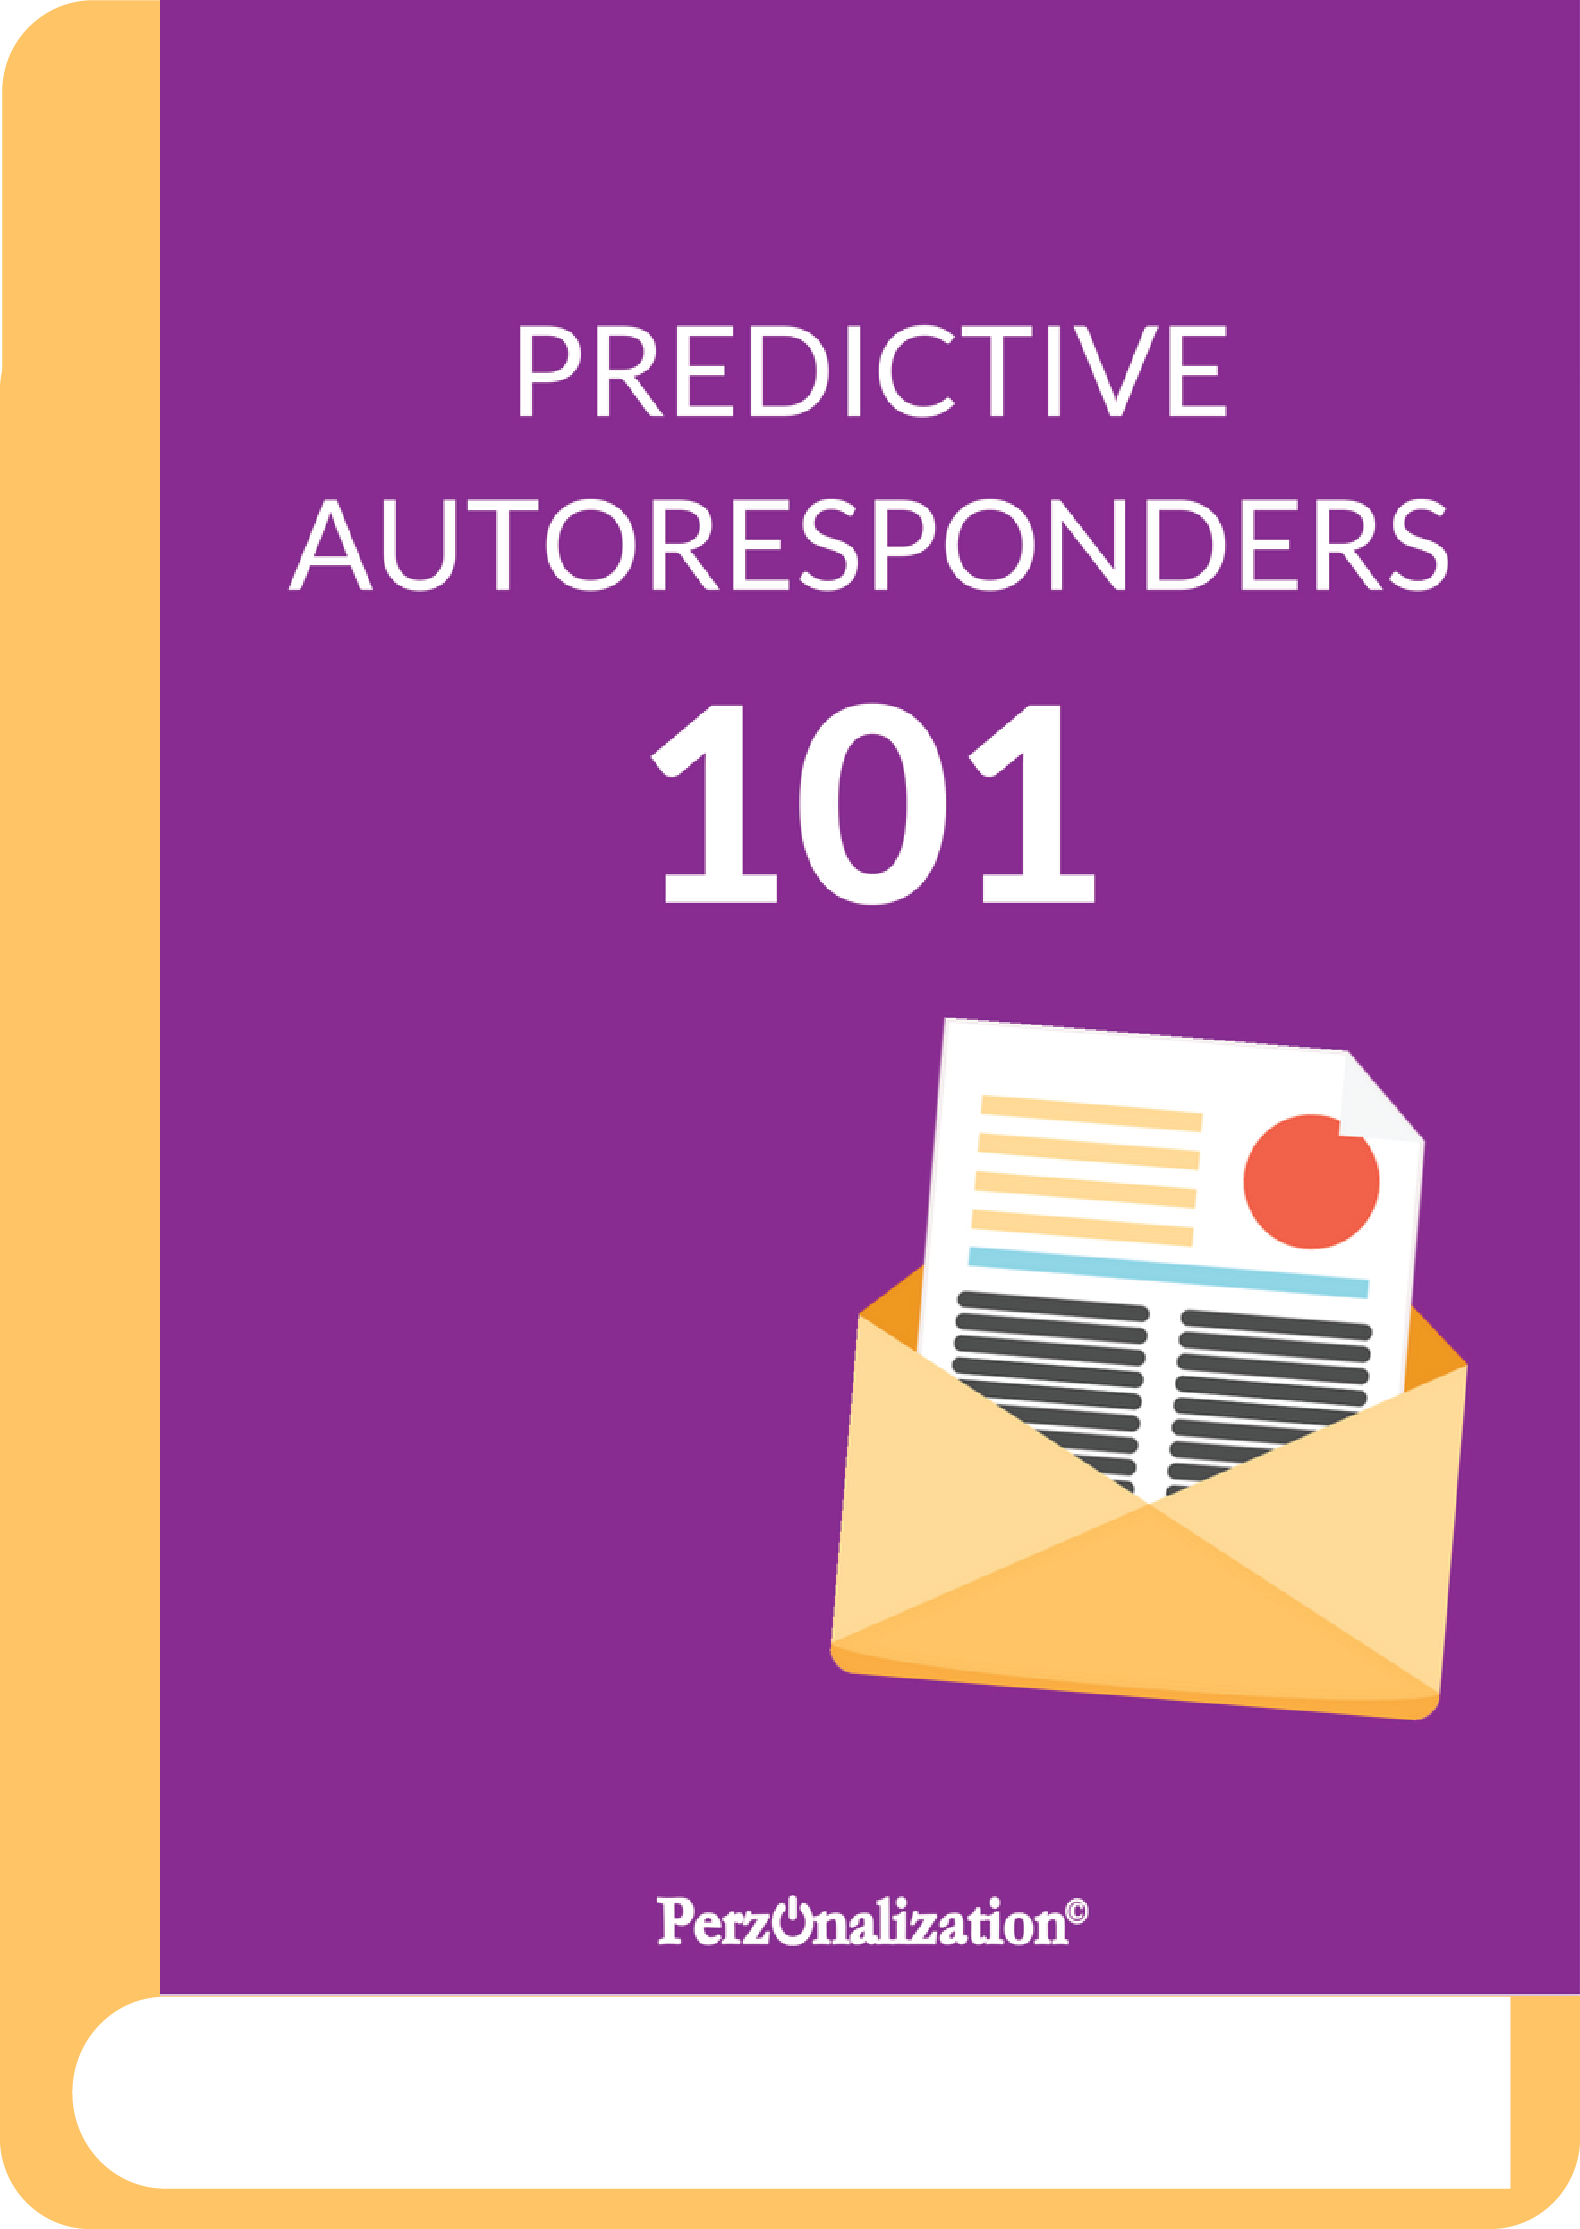 In today’s email marketing environment, autoresponders mainly act as ‘if this, then that’ kind of tools but predictive autoresponders add a new layer on top of these. This eBook will help you get an introduction on predictive autoresponders and how to use them on your SMB eCommerce website.